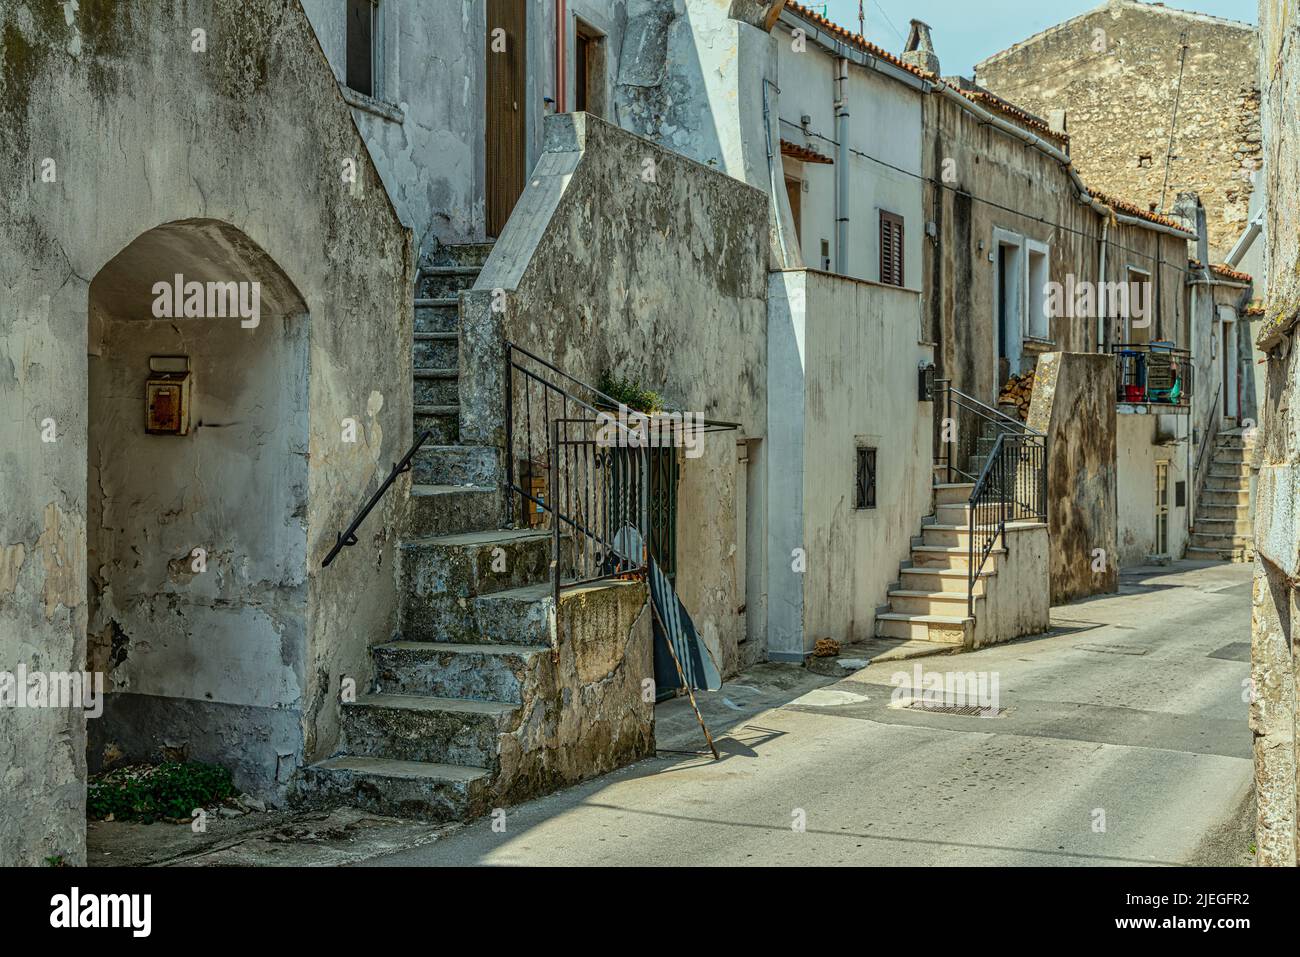 Characteristic alley with steps leading to the houses of a Mediterranean Apulian village. Vico del Gargano, Foggia province, Puglia, Italy, Europe Stock Photo